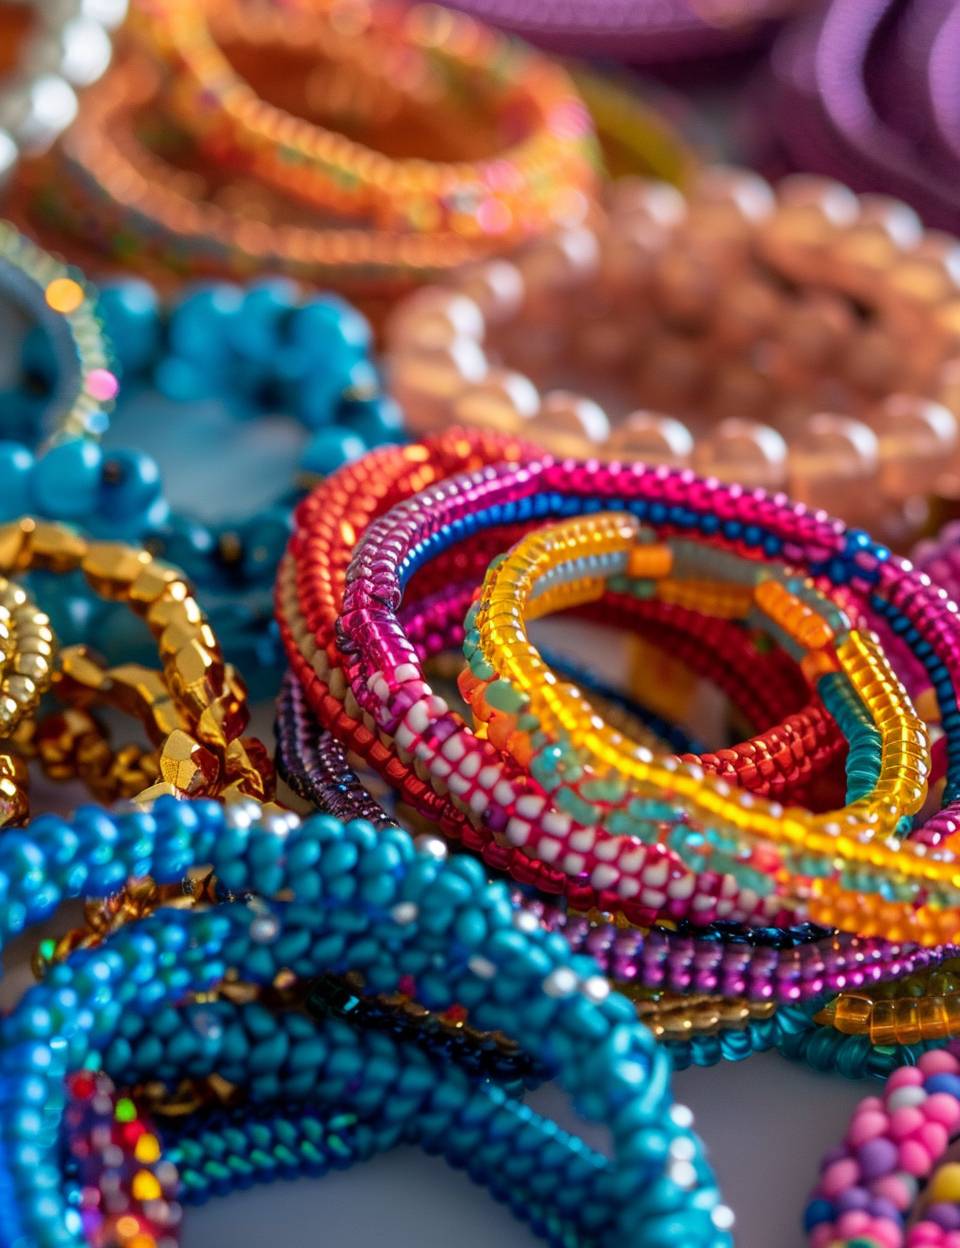 Studio photograph from above of a table with beaded crochet rope bracelets. Closeup. Shallow depth of field.